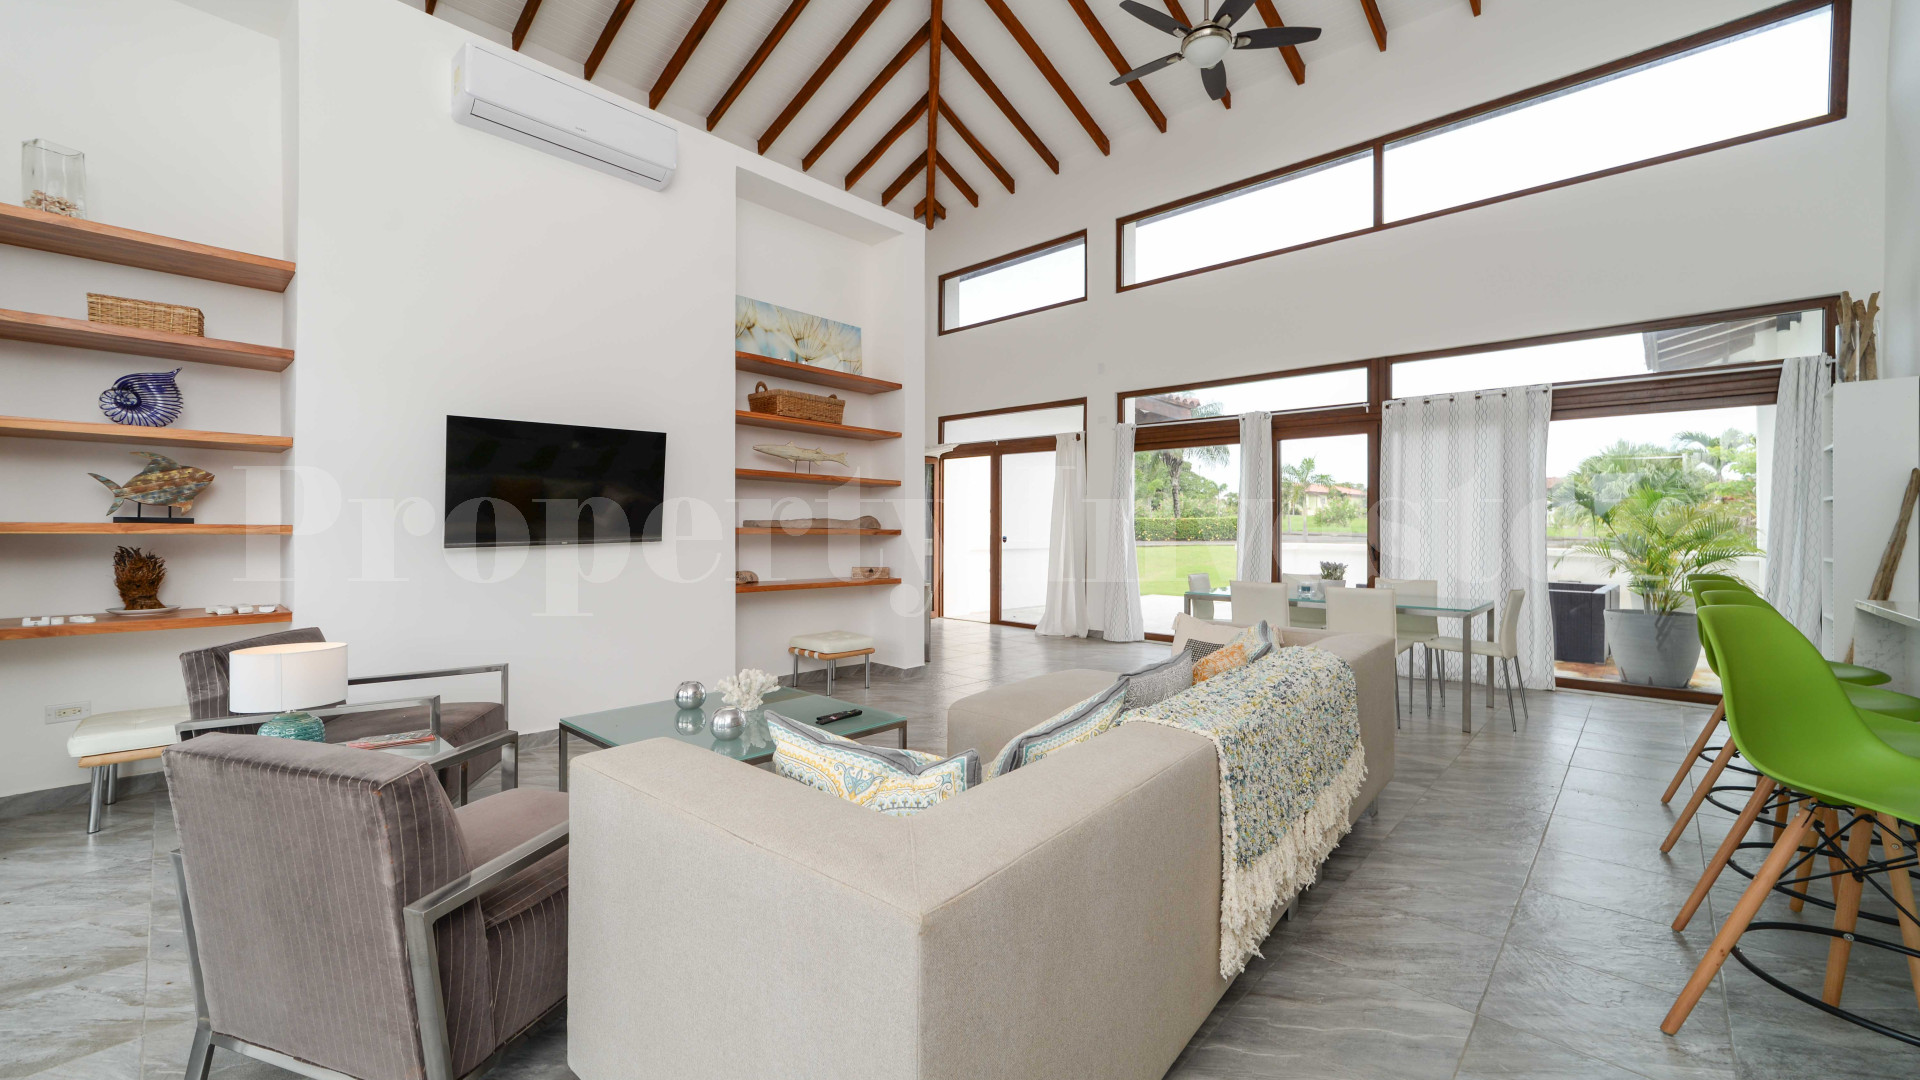 Newly Completed 3 Bedroom Luxury Oceanfront Villa for Sale in Pedasi, Panama